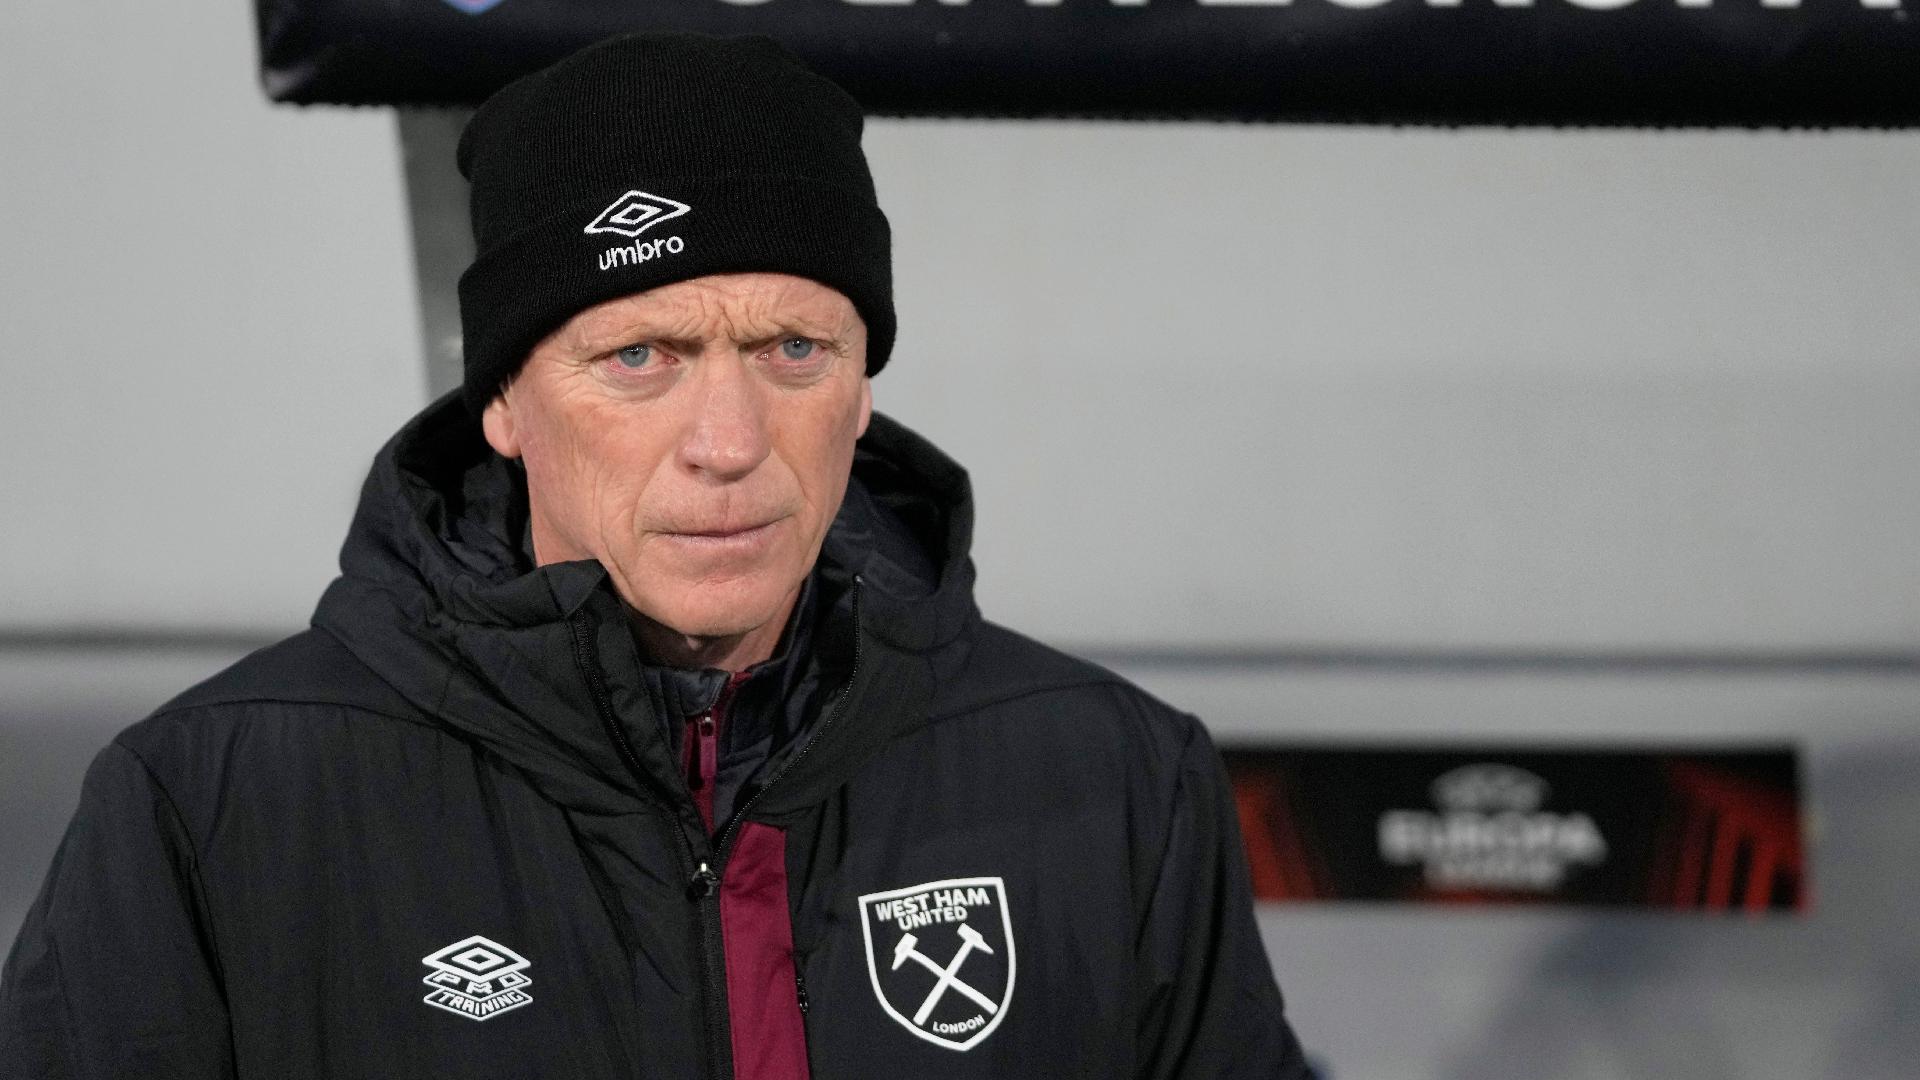 David Moyes urges West Ham to finish the job and top Group A